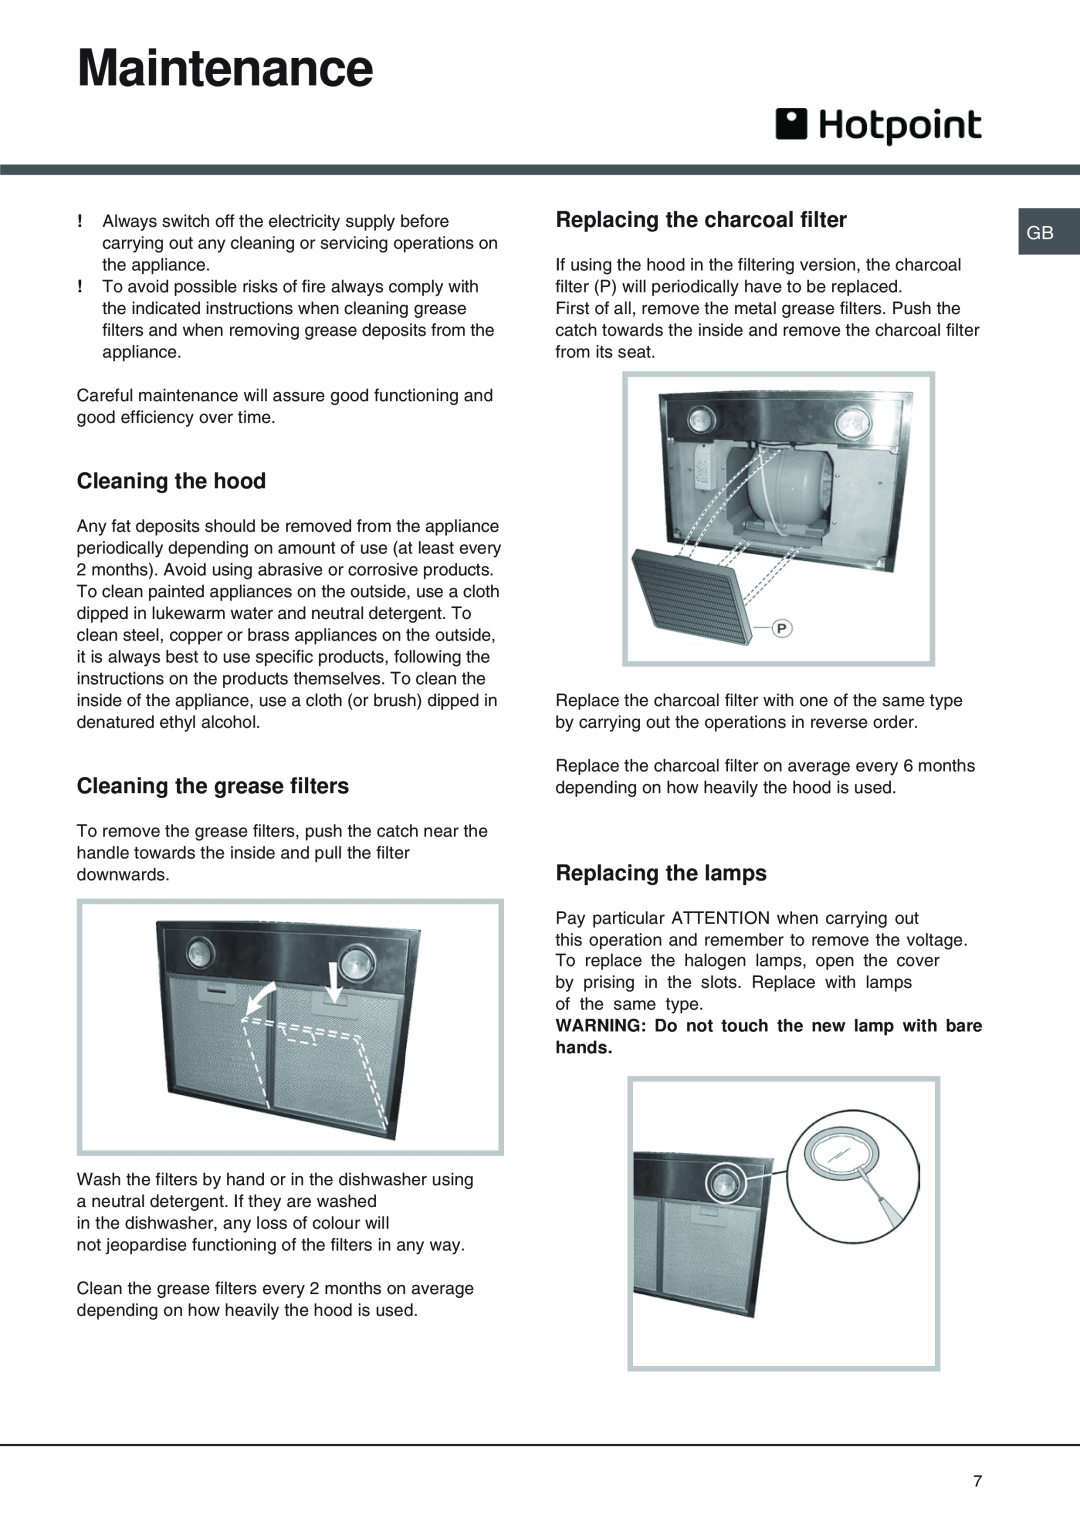 Hotpoint HD 93 X manual Maintenance, Cleaning the hood, Cleaning the grease filters, Replacing the charcoal filter 